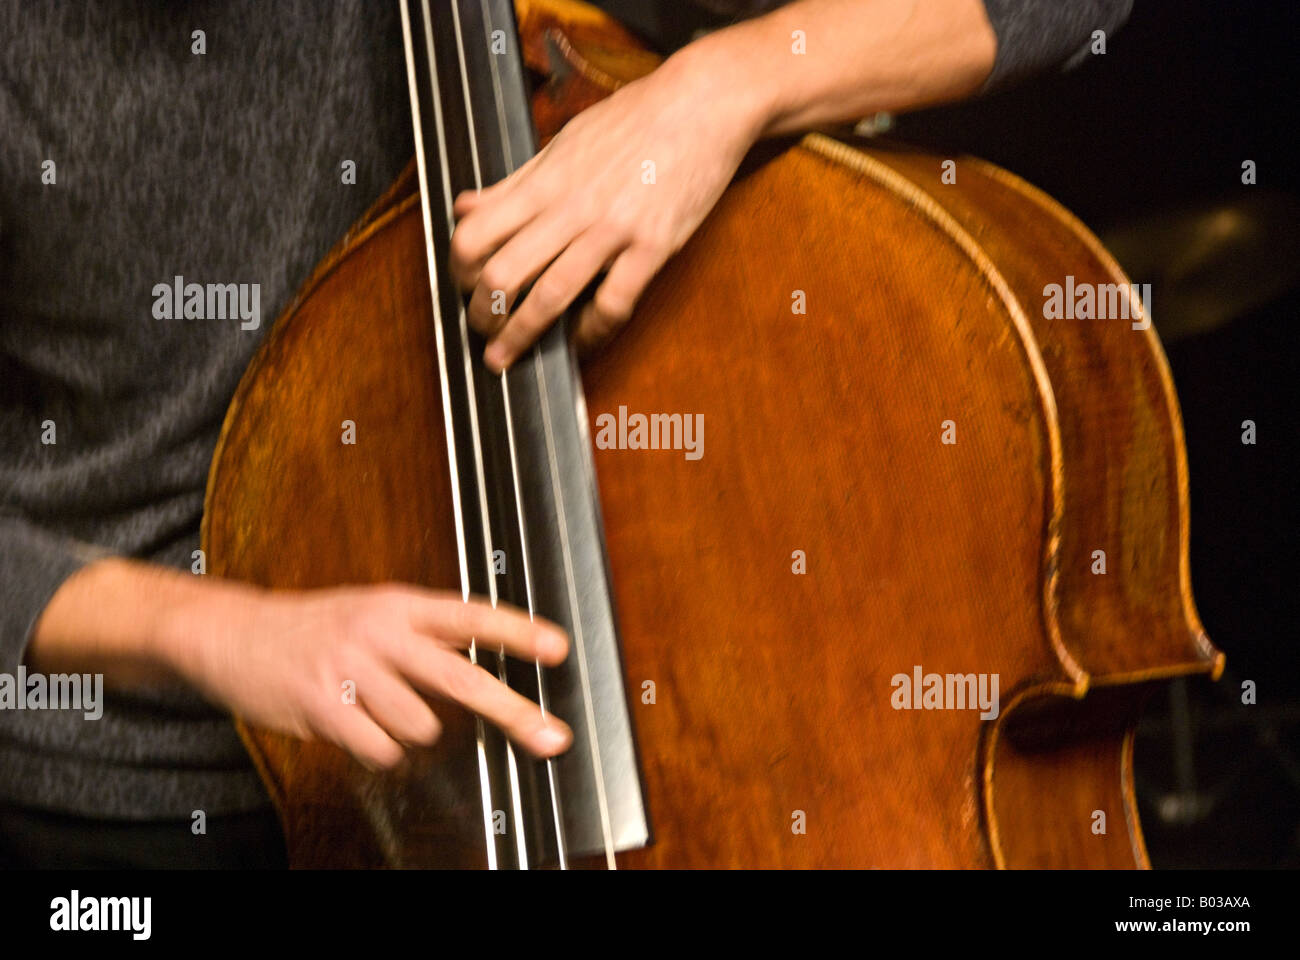 Musician playing double bass Stock Photo